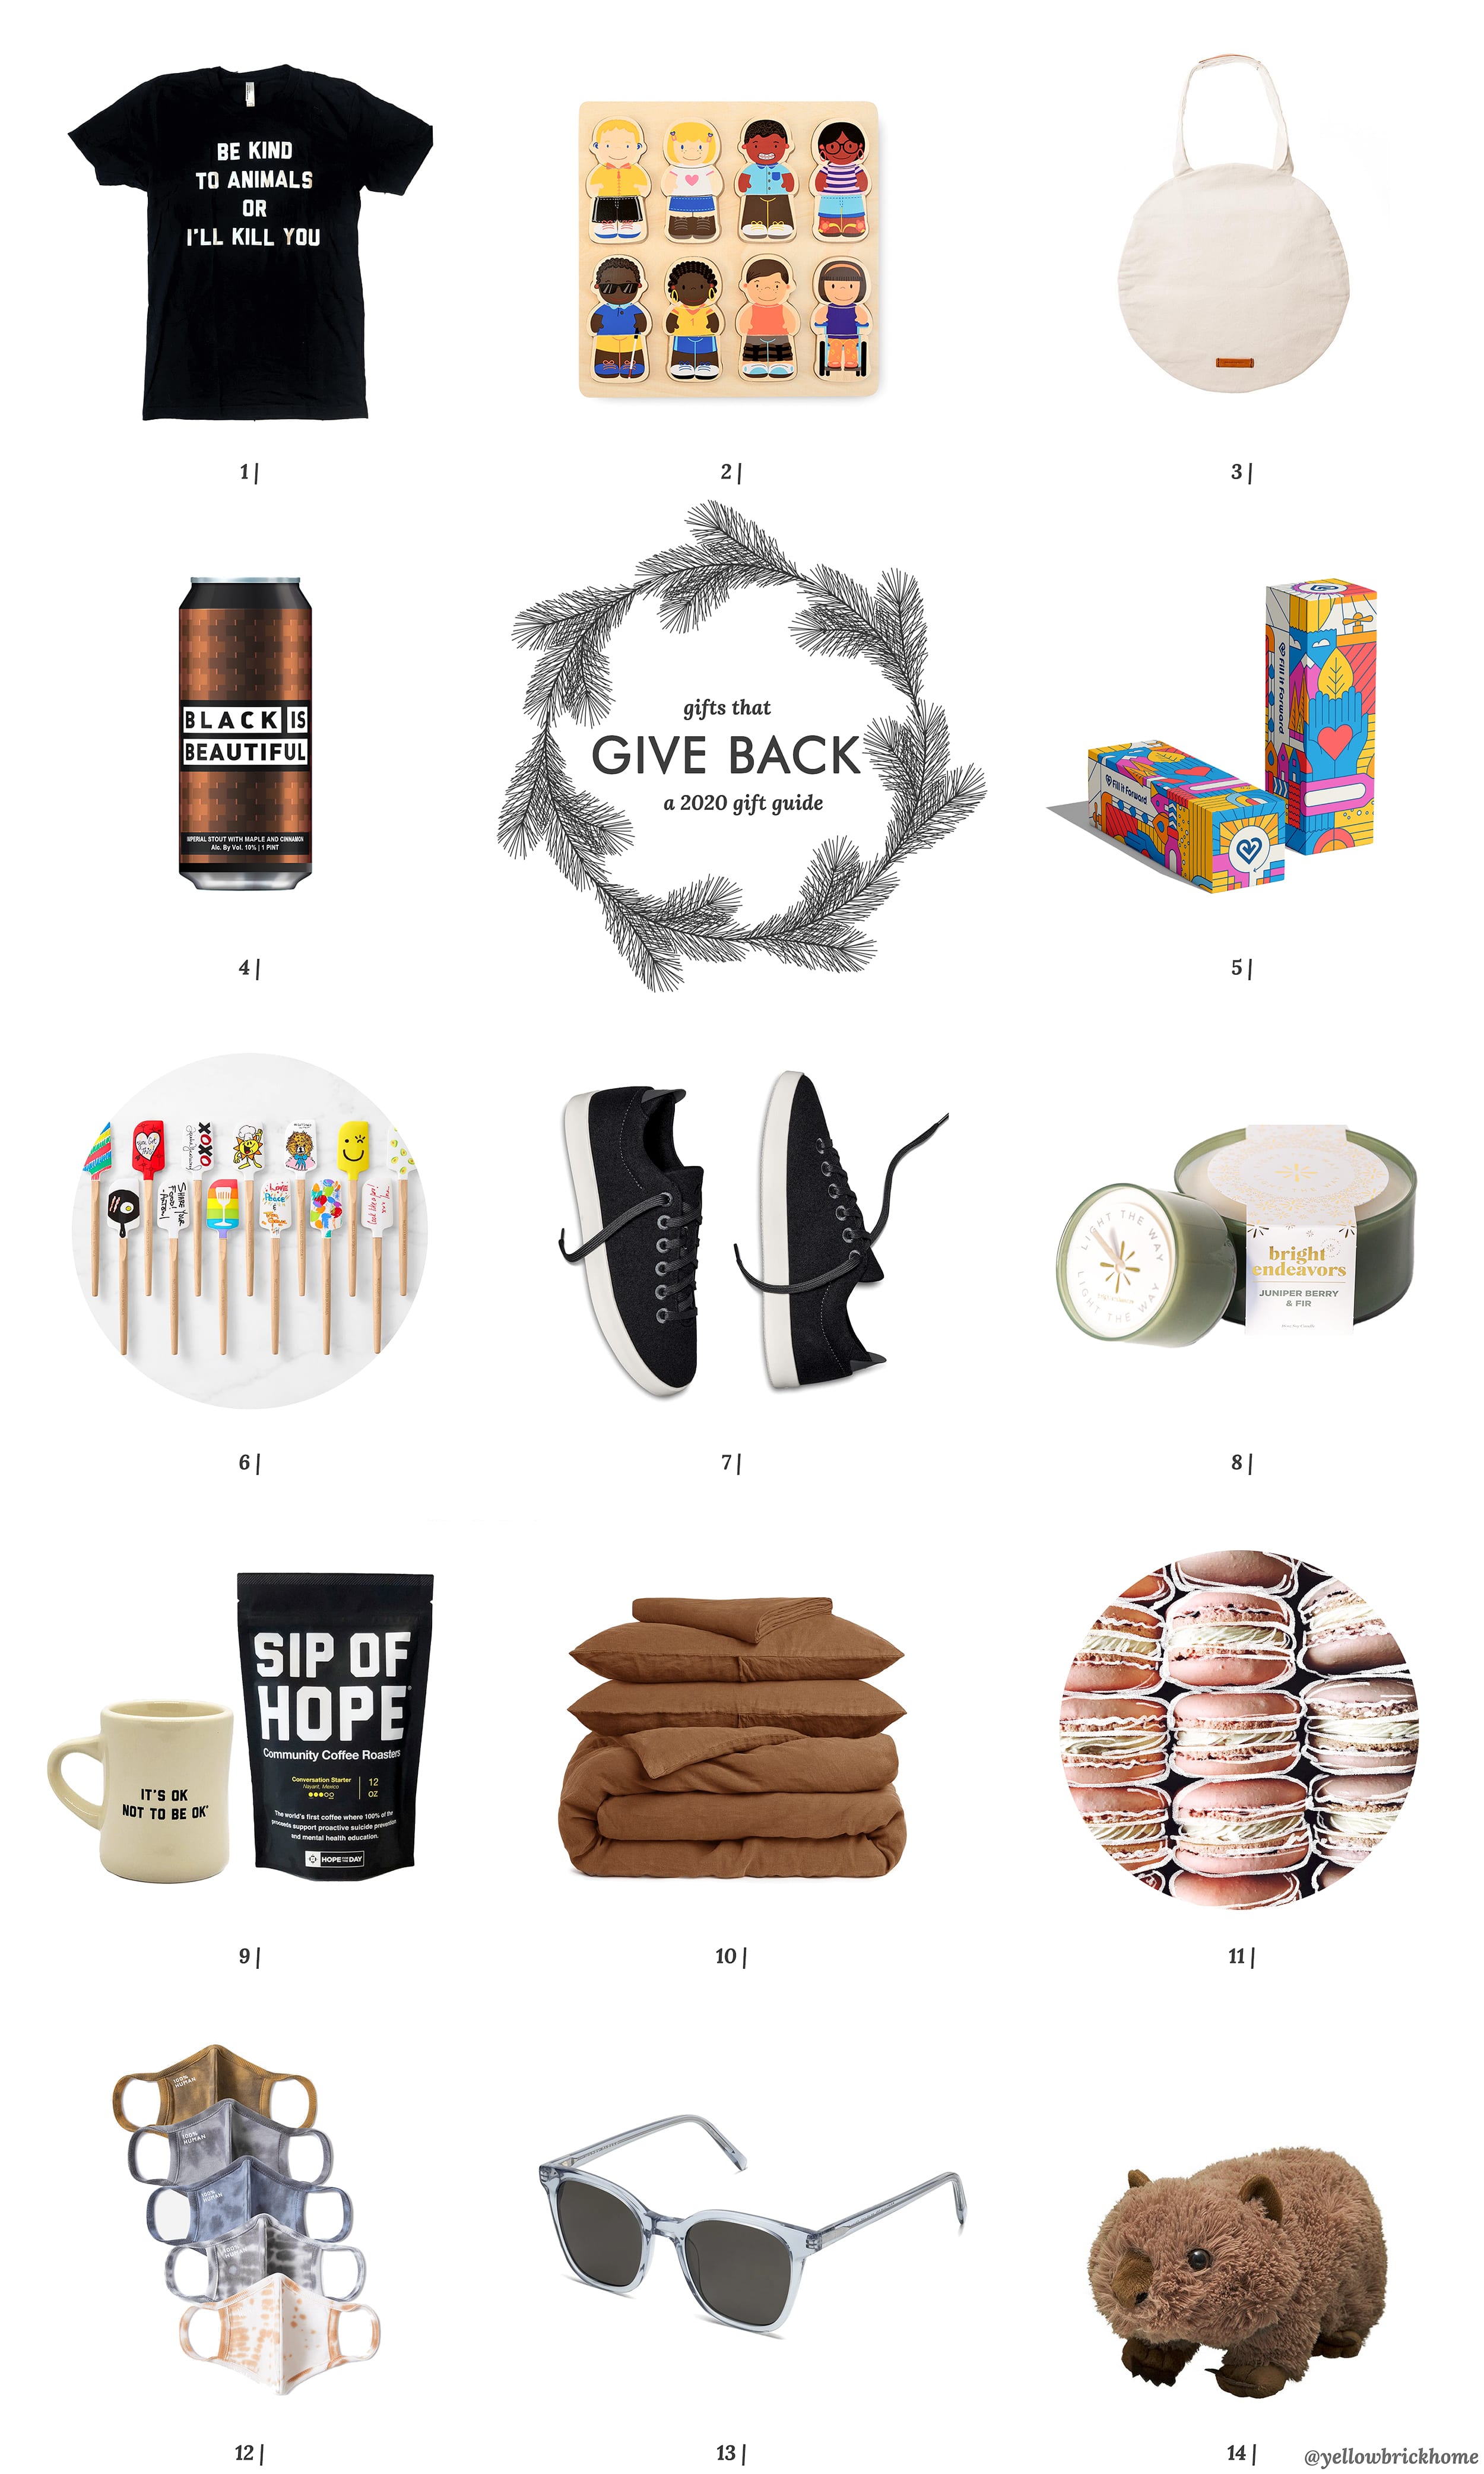 This season, give back by gifting these charitable items to friends and family | via Yellow Brick Home